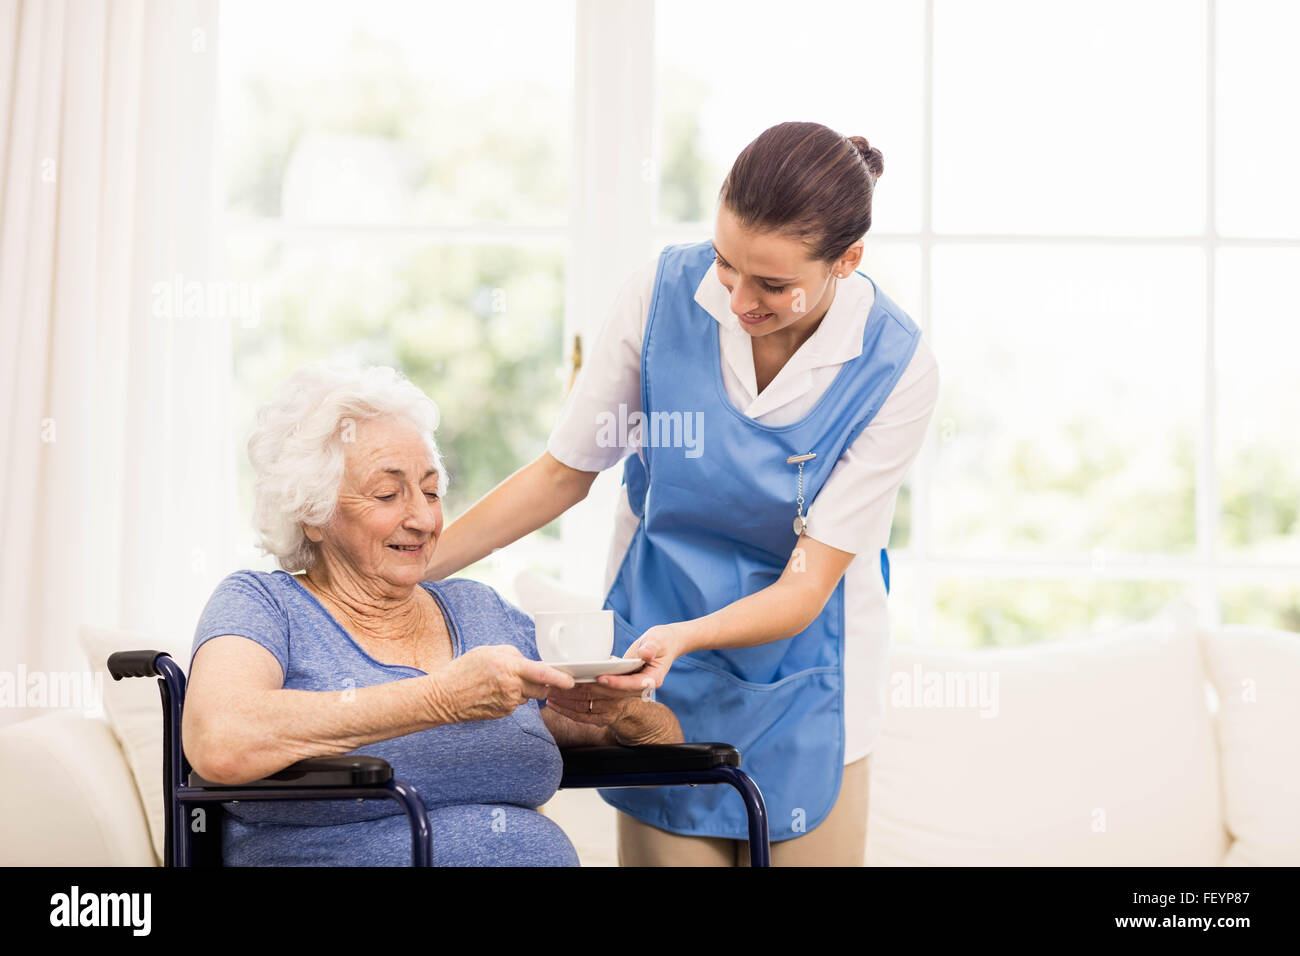 Doctor checking patients health Stock Photo - Alamy